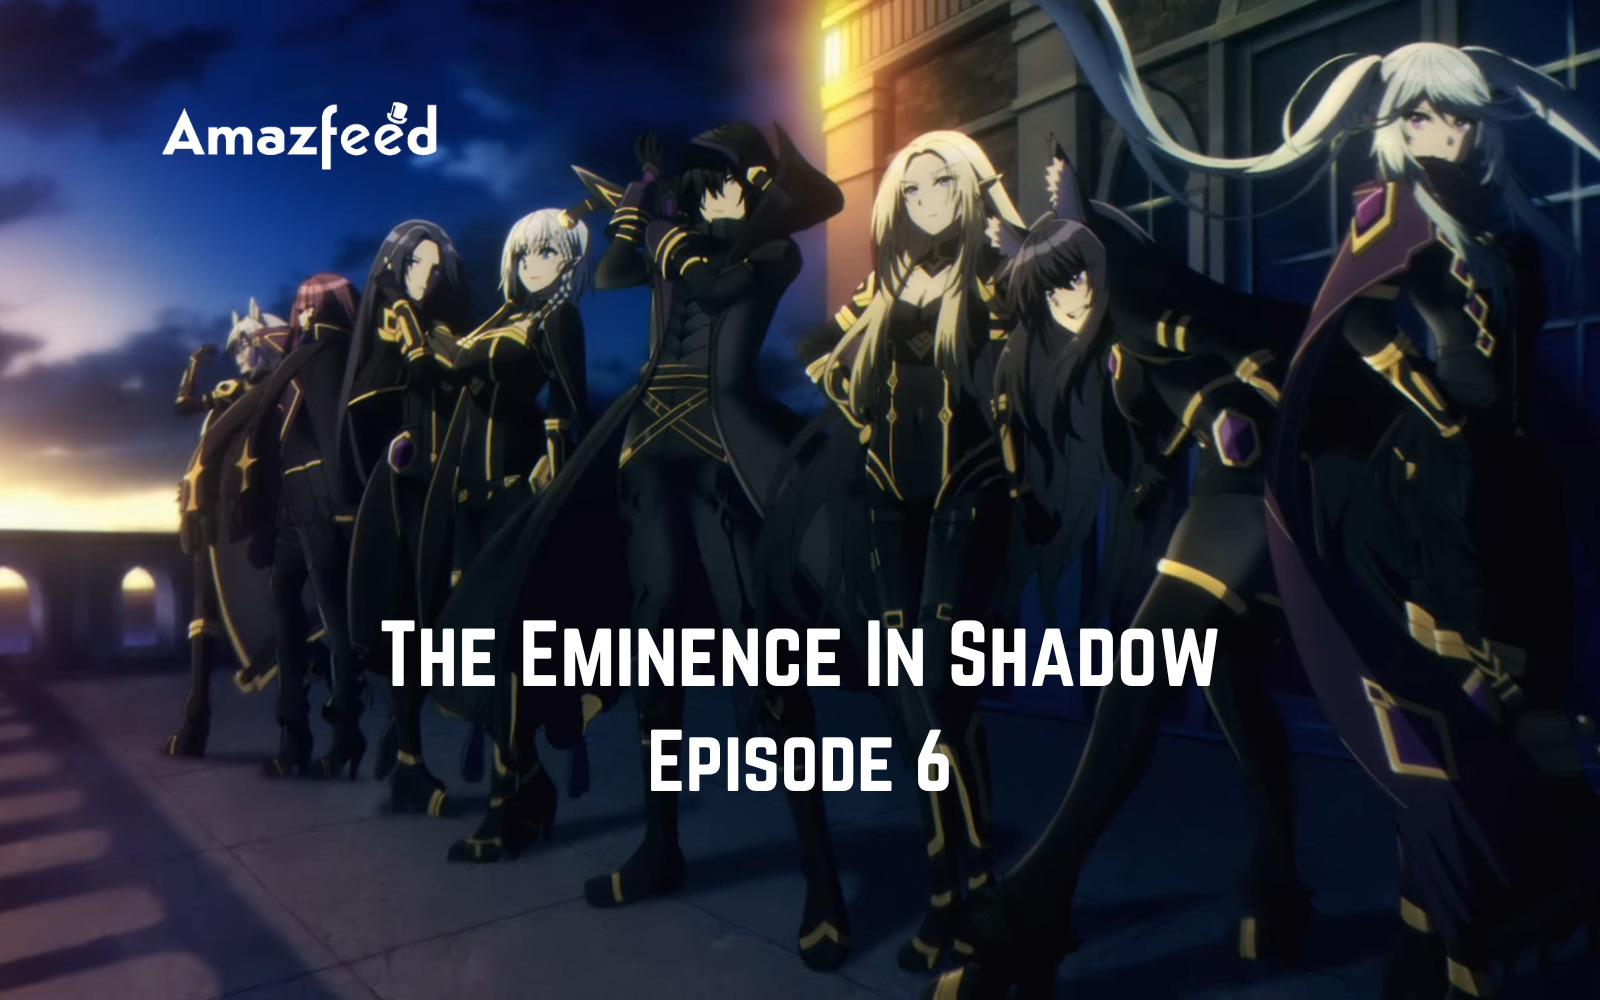 The Eminence in Shadow Episode 6 Review: Sniffing Out the Imposters